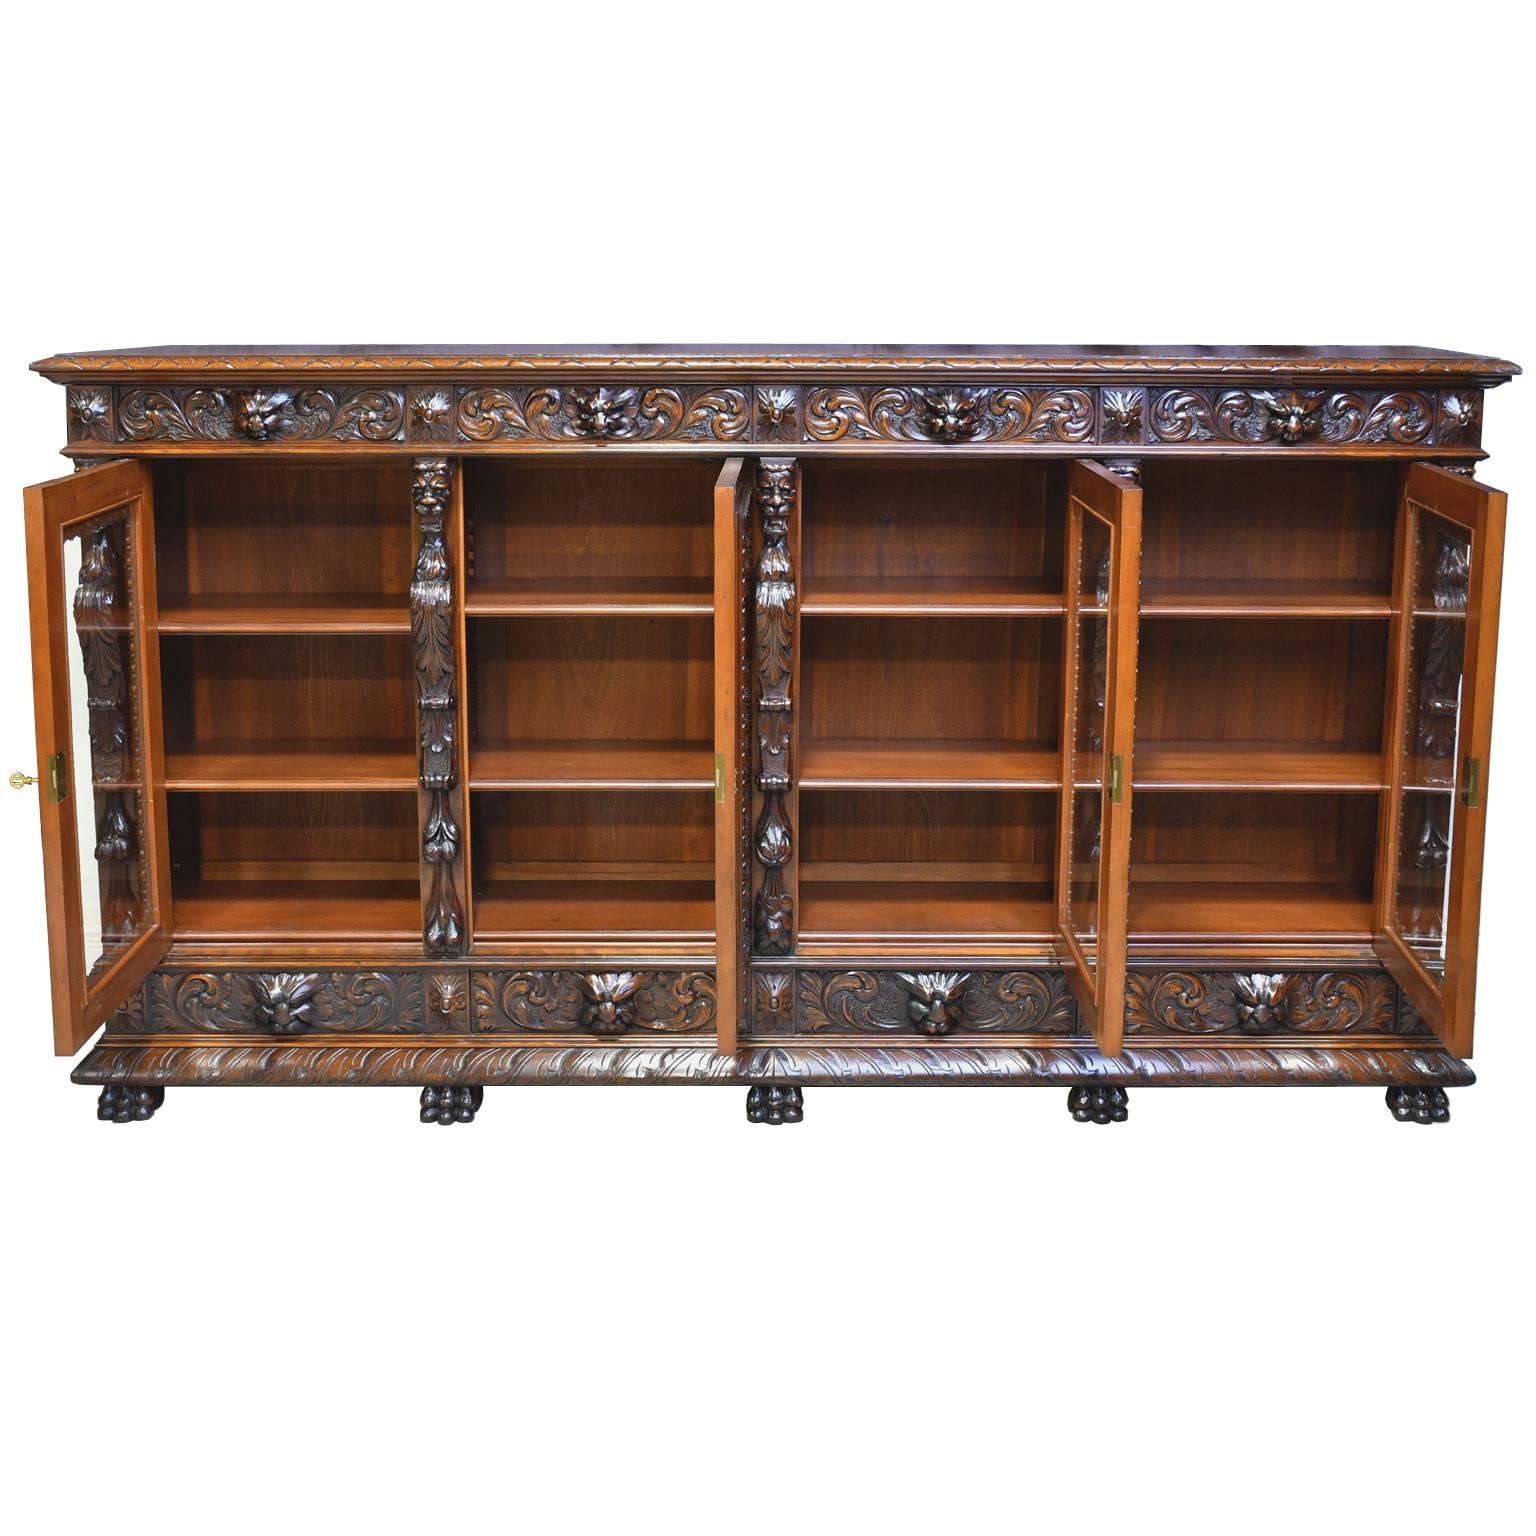 Hand-Carved French Renaissance-Style Bookcase in Walnut with Original Glass, circa 1900